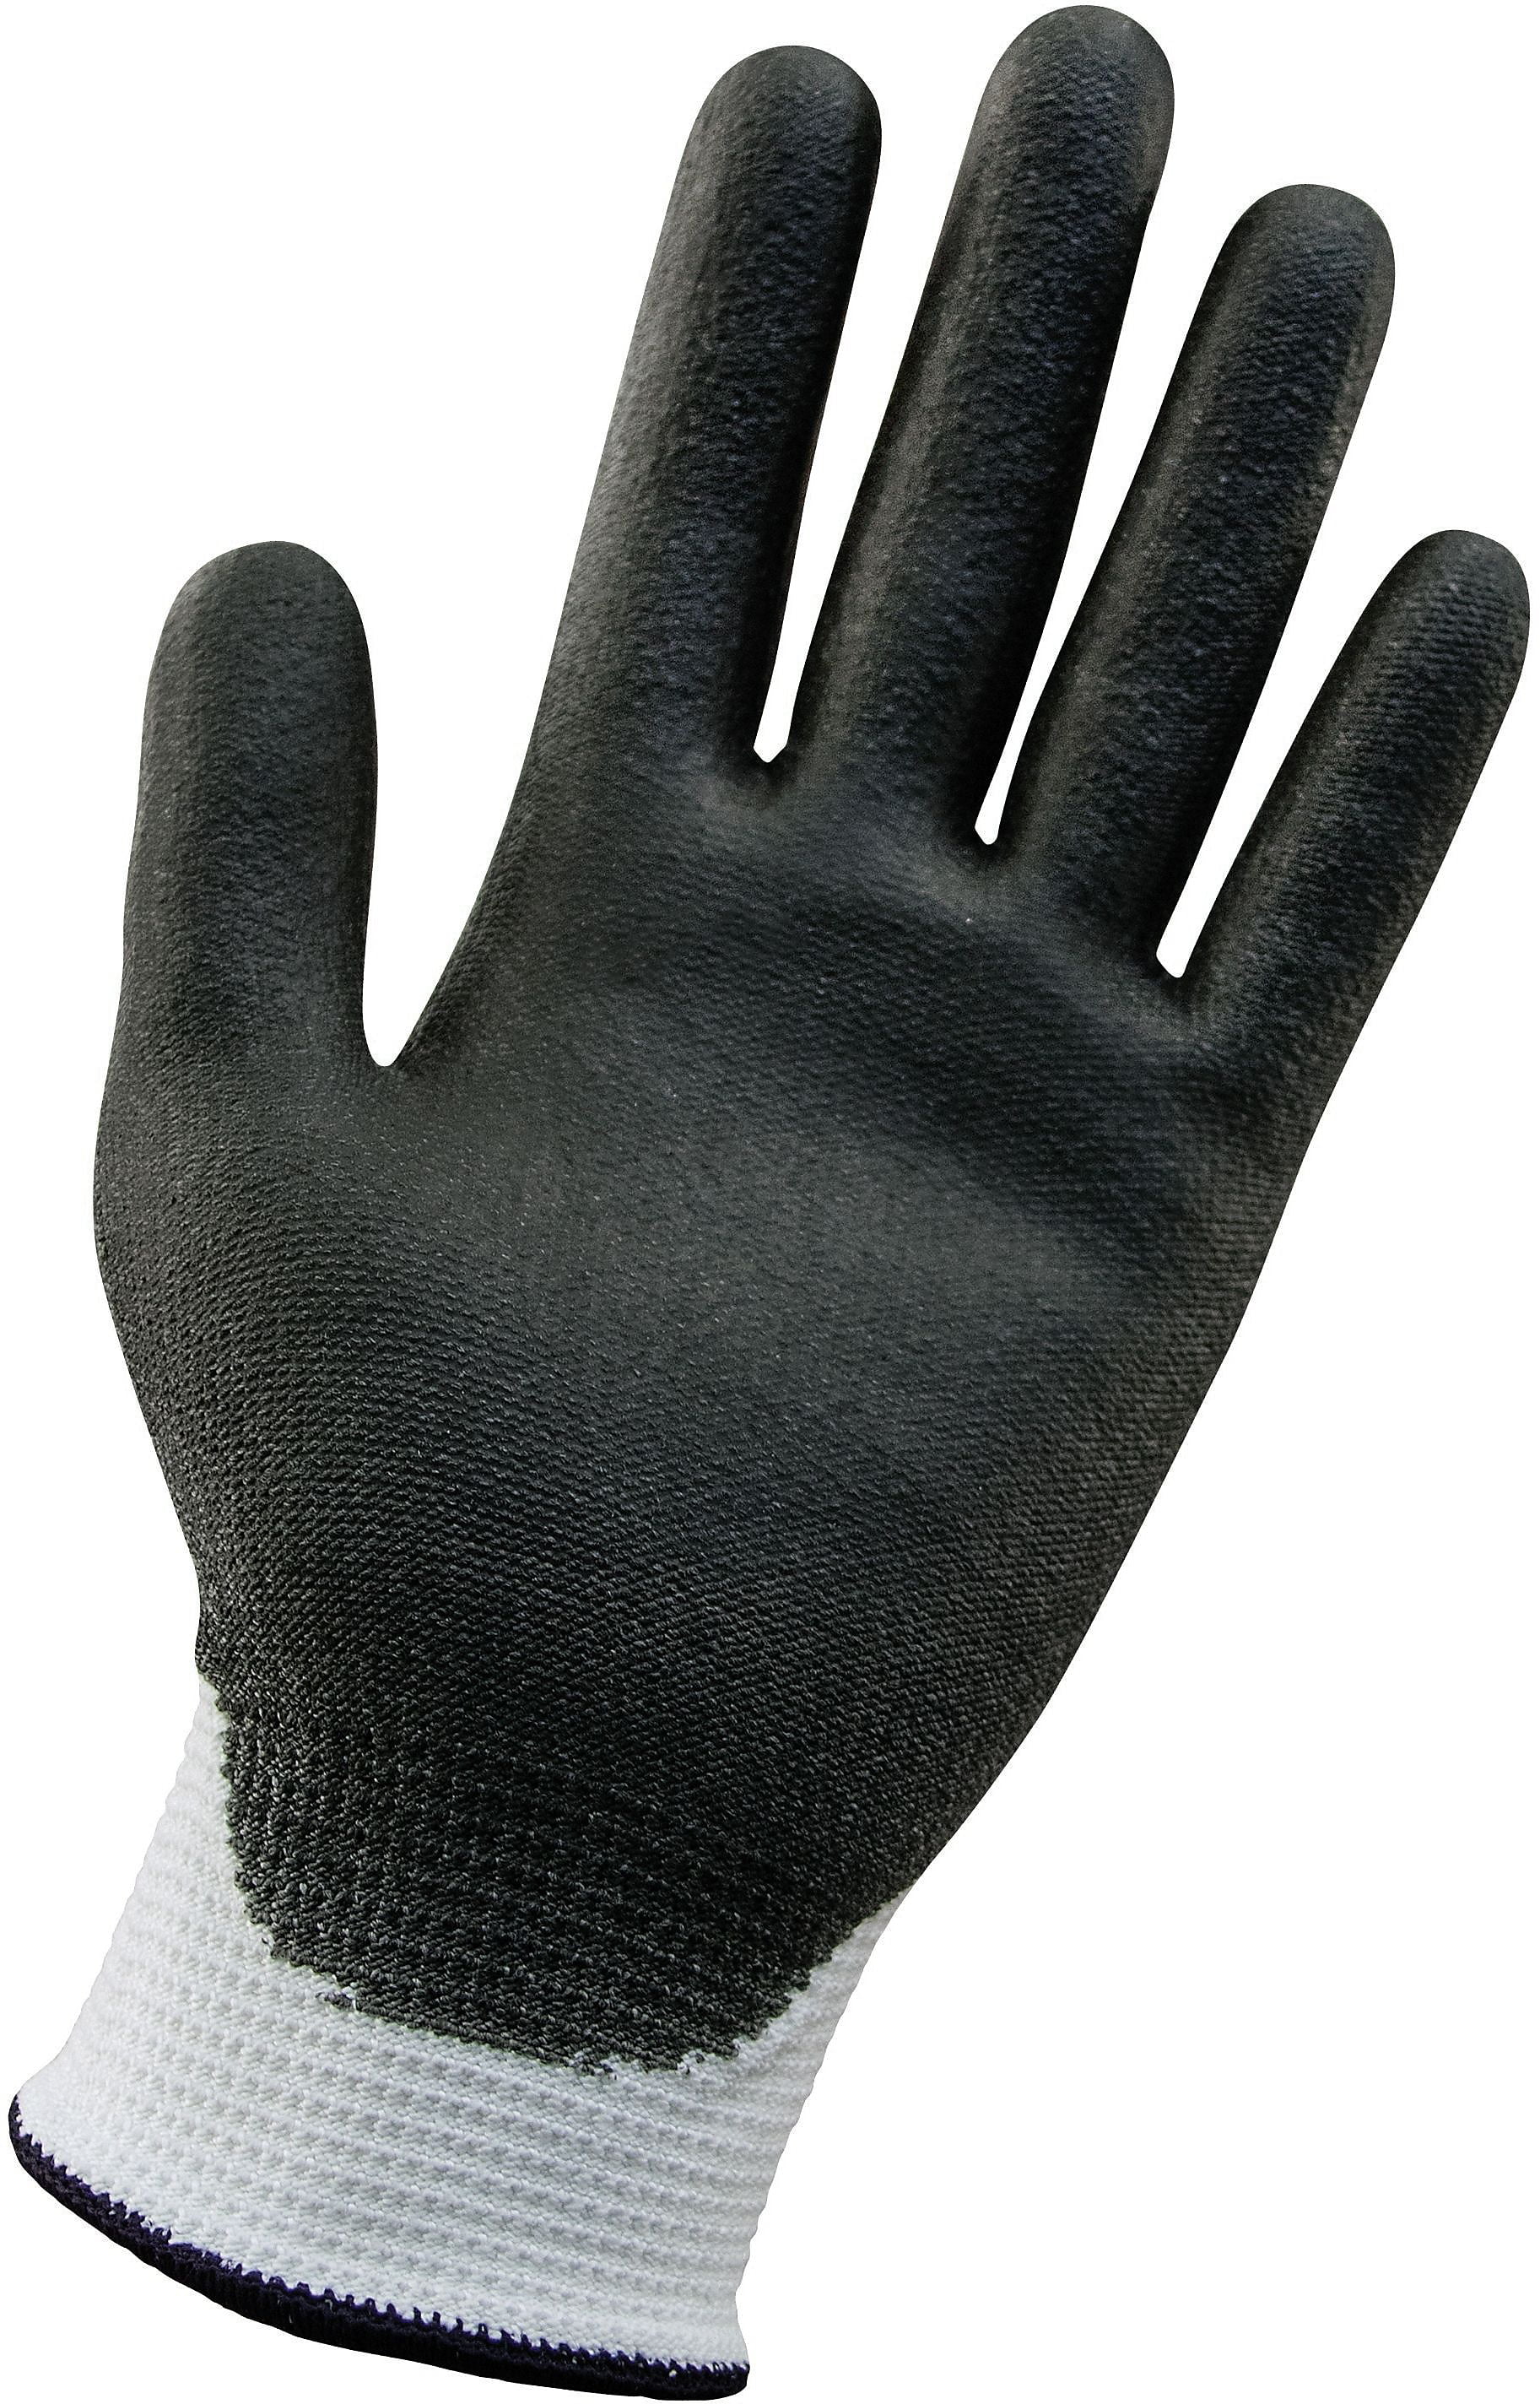 Jackson Safety G60 Level 3 Economy Cut Resistant Gloves Black & White 120 Each 10 5 Bags Kimberly-Clark Professional 60 Pairs/Case 12 Pairs Bag Extra-Large 42547 